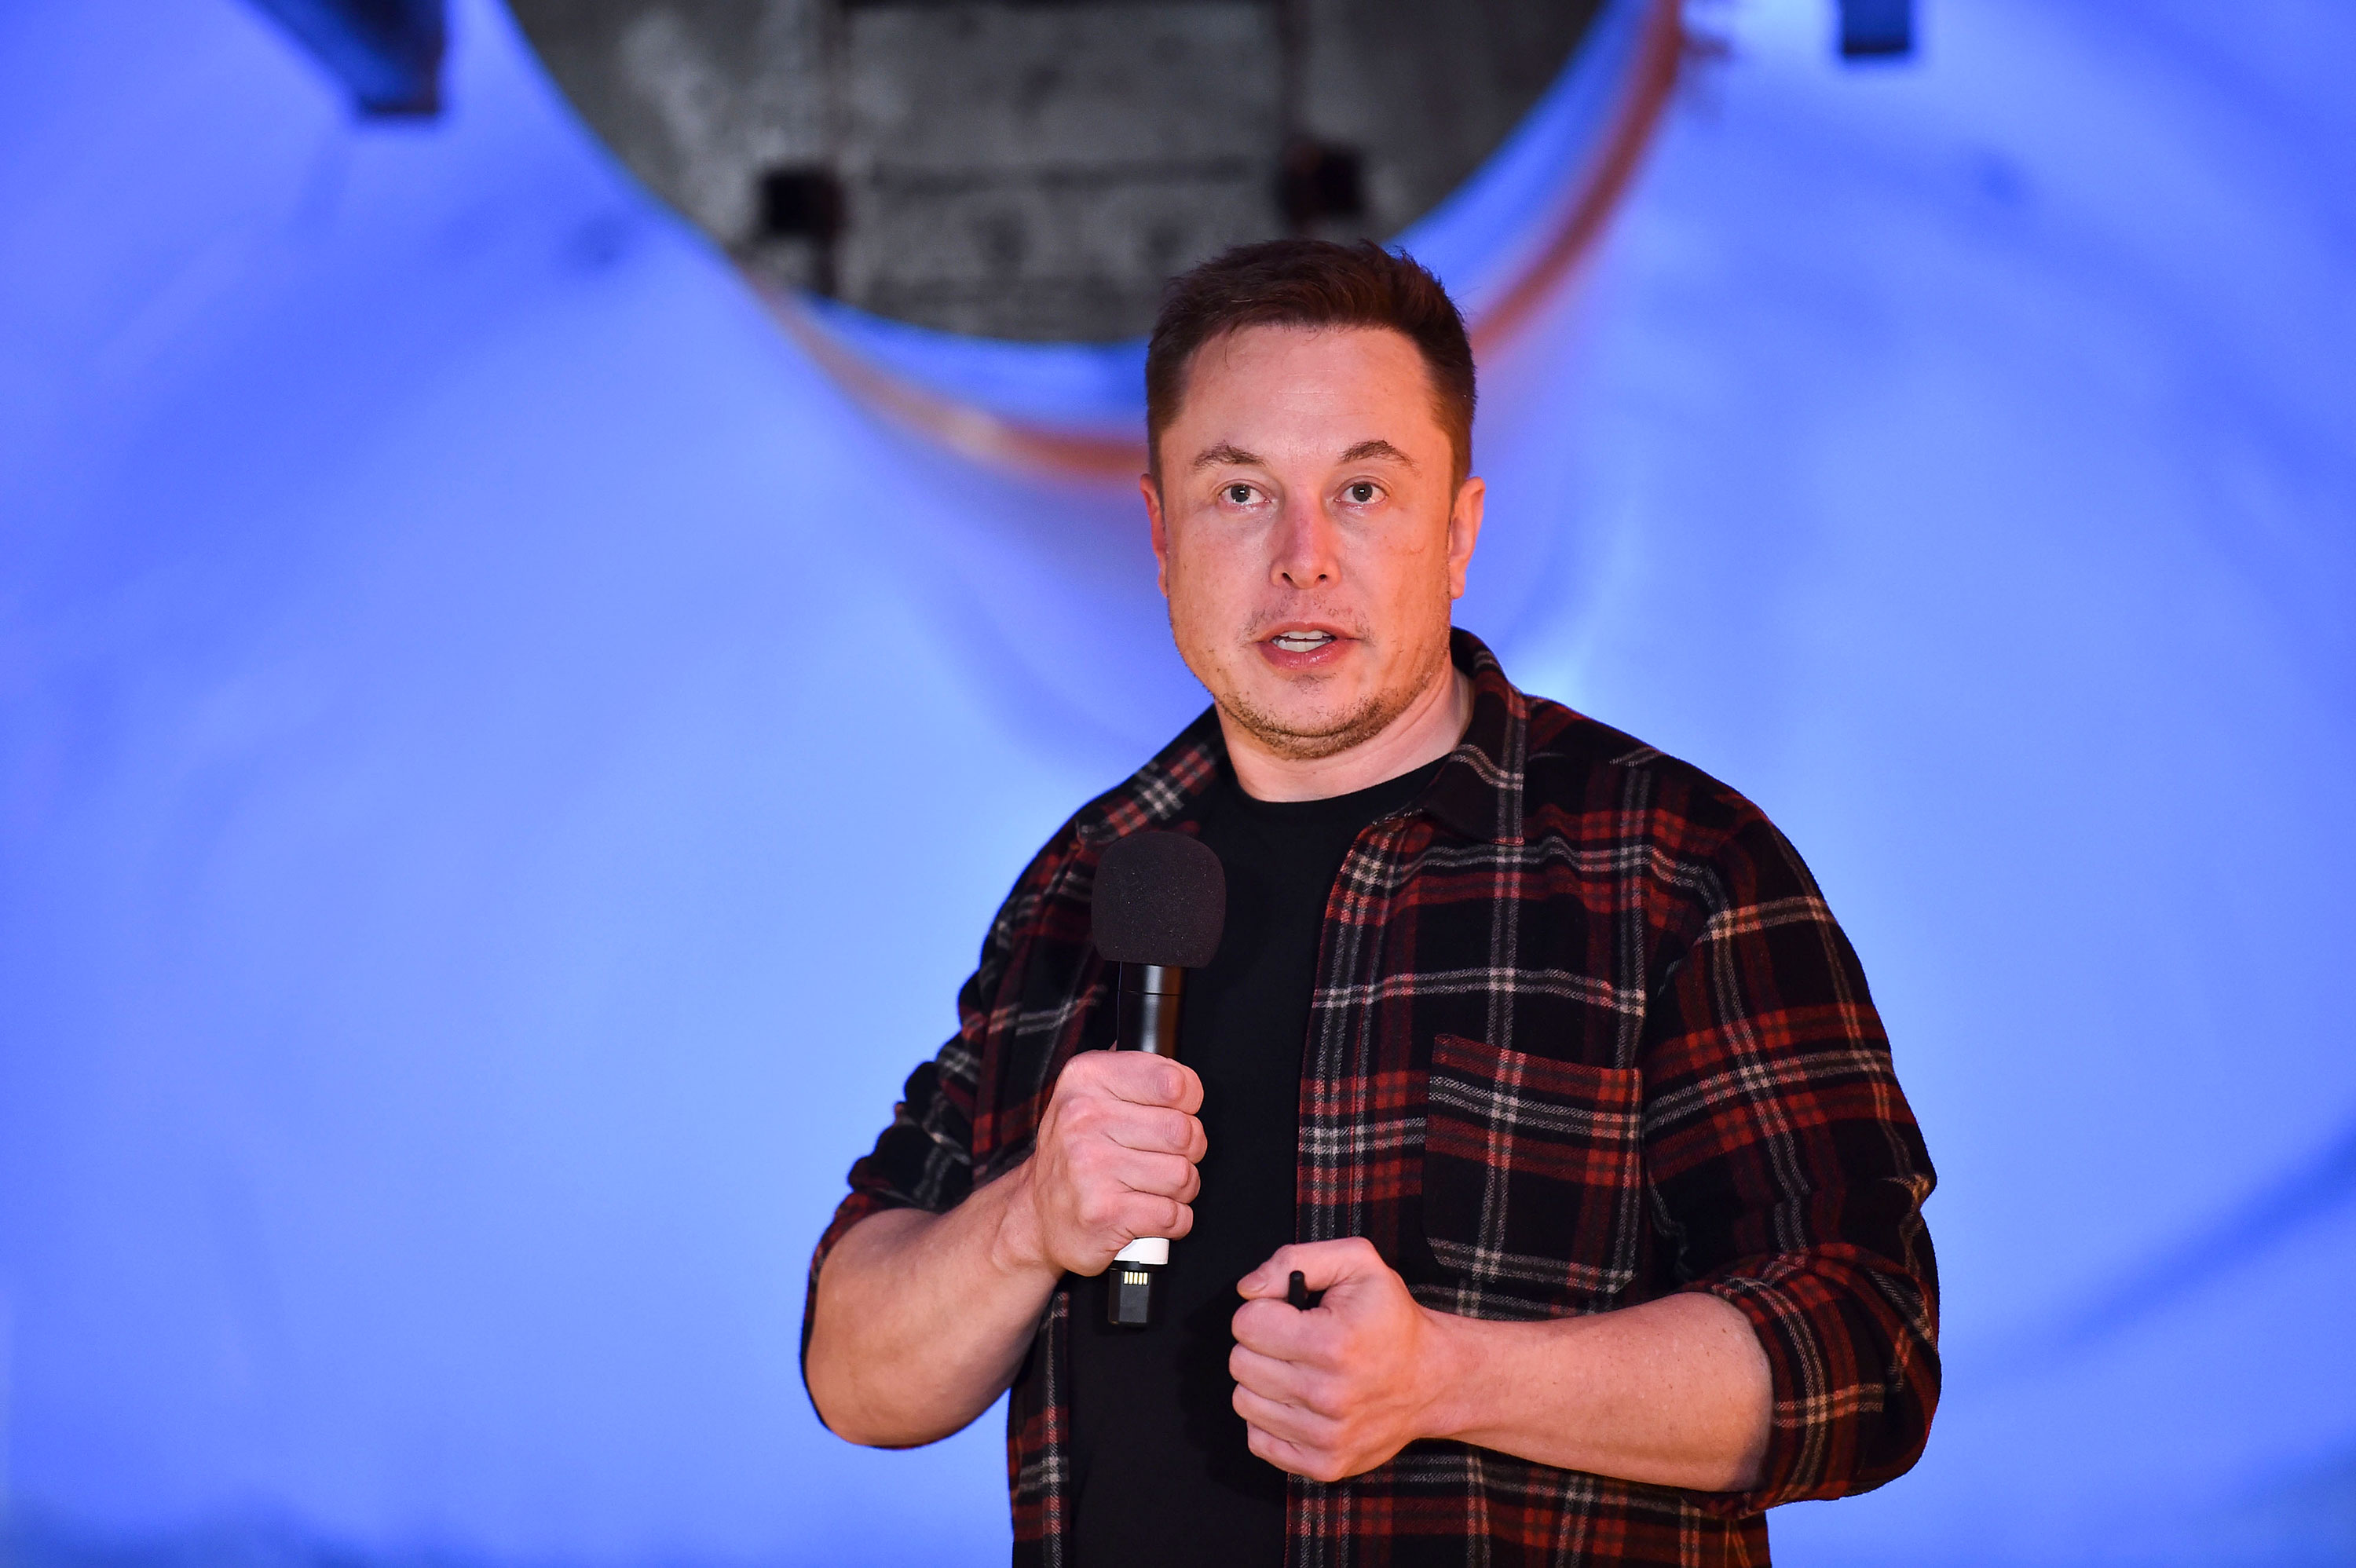 Elon Musk, co-founder and chief executive officer of Tesla Inc., speaks during an unveiling event for the Boring Company Hawthorne test tunnel in Hawthorne, south of Los Angeles, California on December 18, 2018.